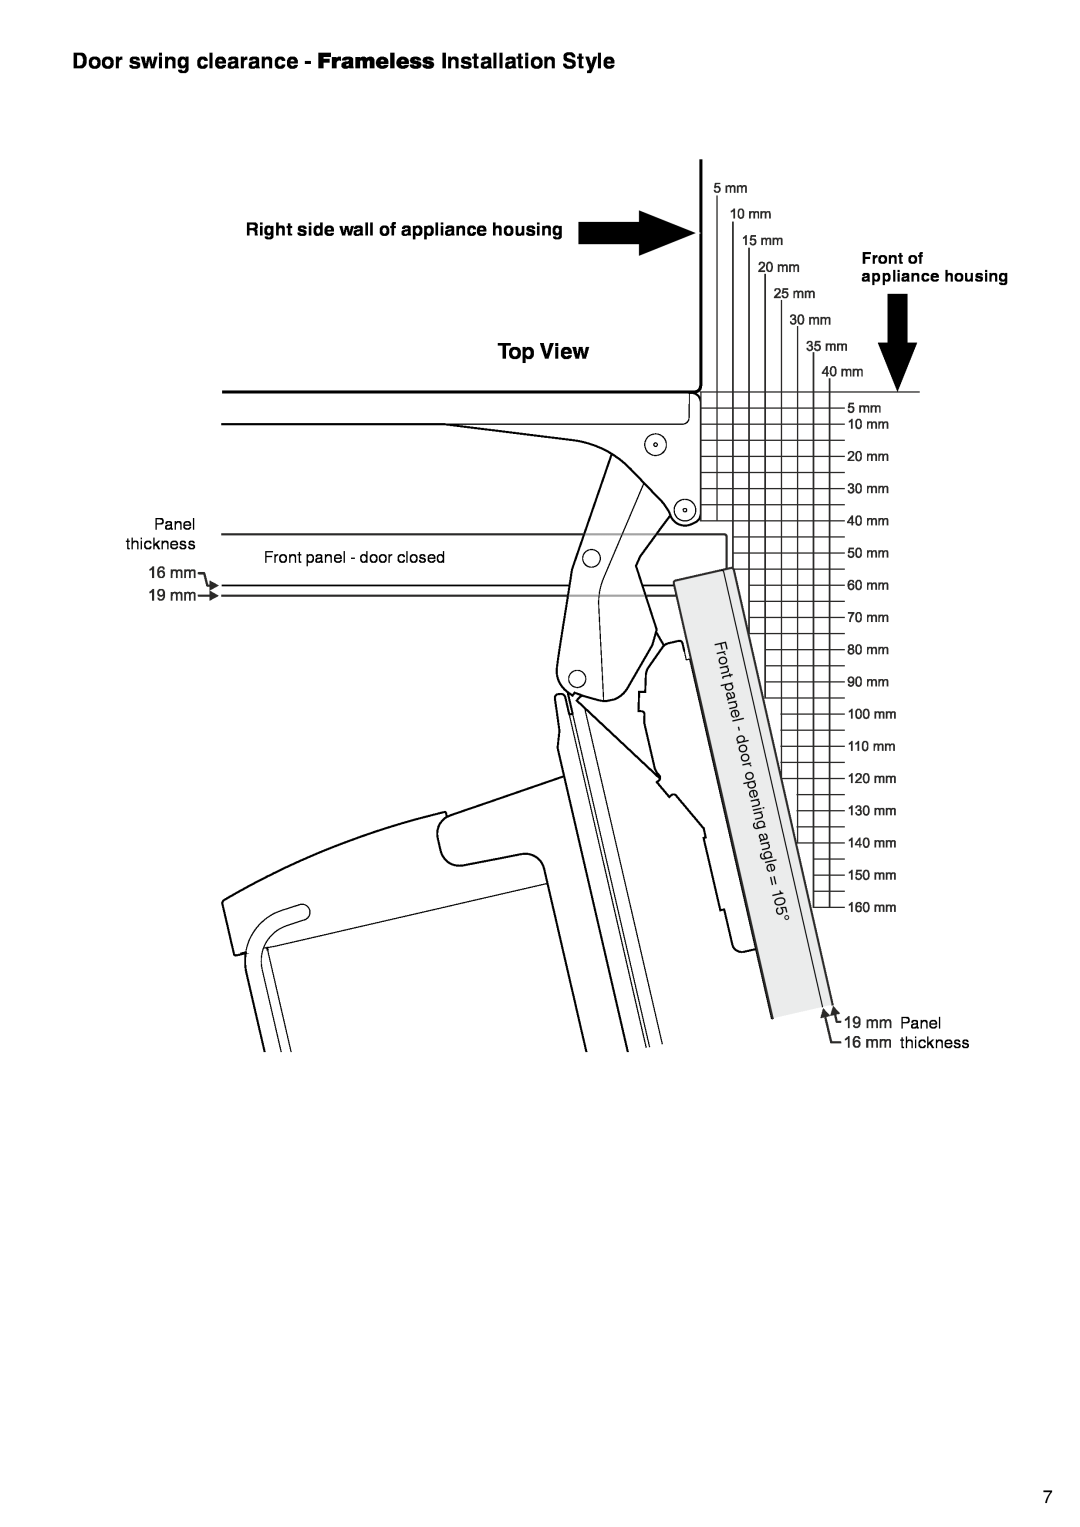 Liebherr 7083-103-00 installation instructions Top View, angle, opening, door, panel, Front 